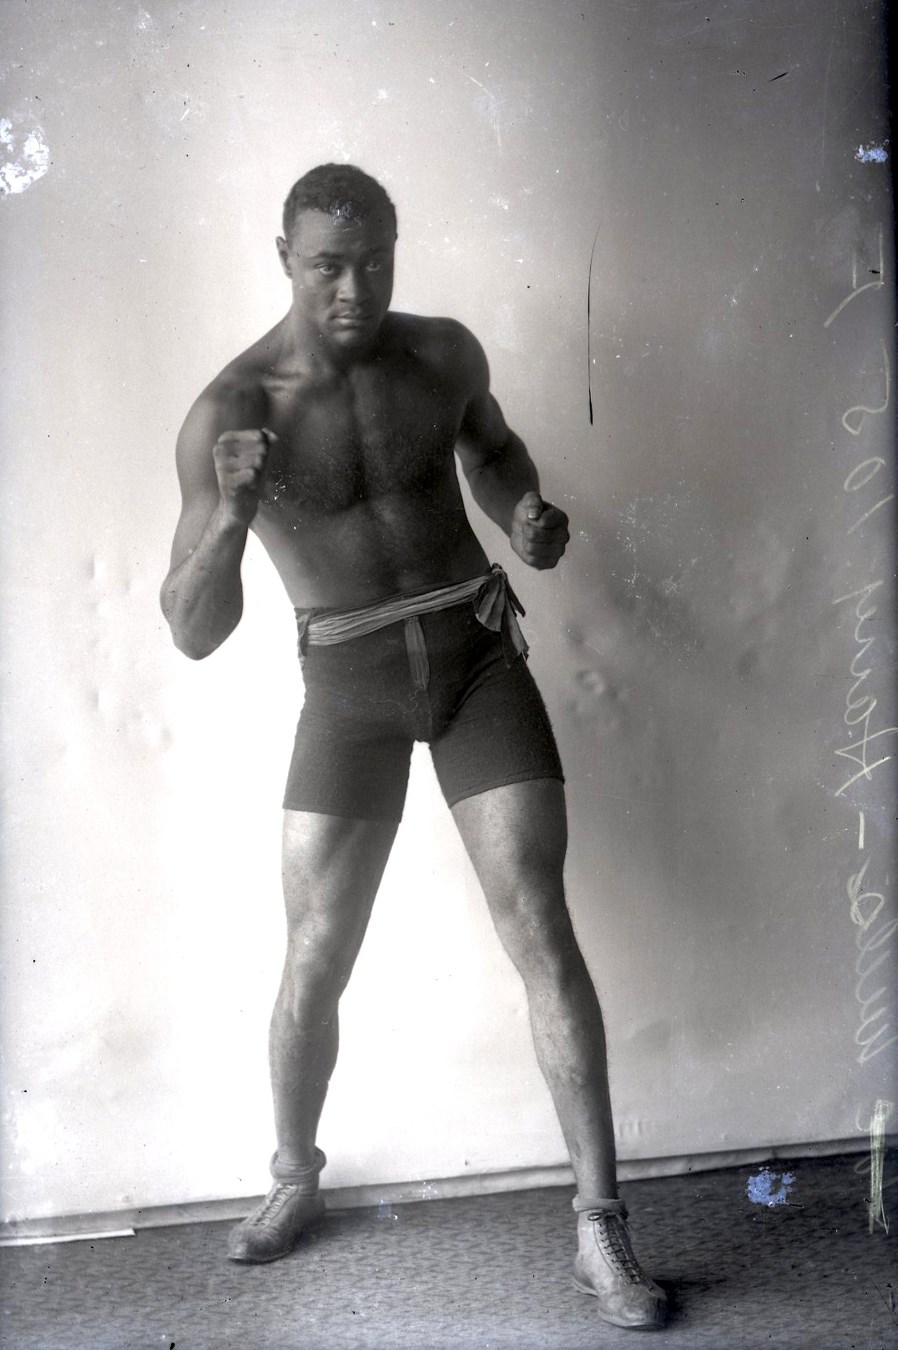 - 1910s Harry Wills "Black Panther" Boxing Pose Type I Glass Plate Negative by Dana Studio